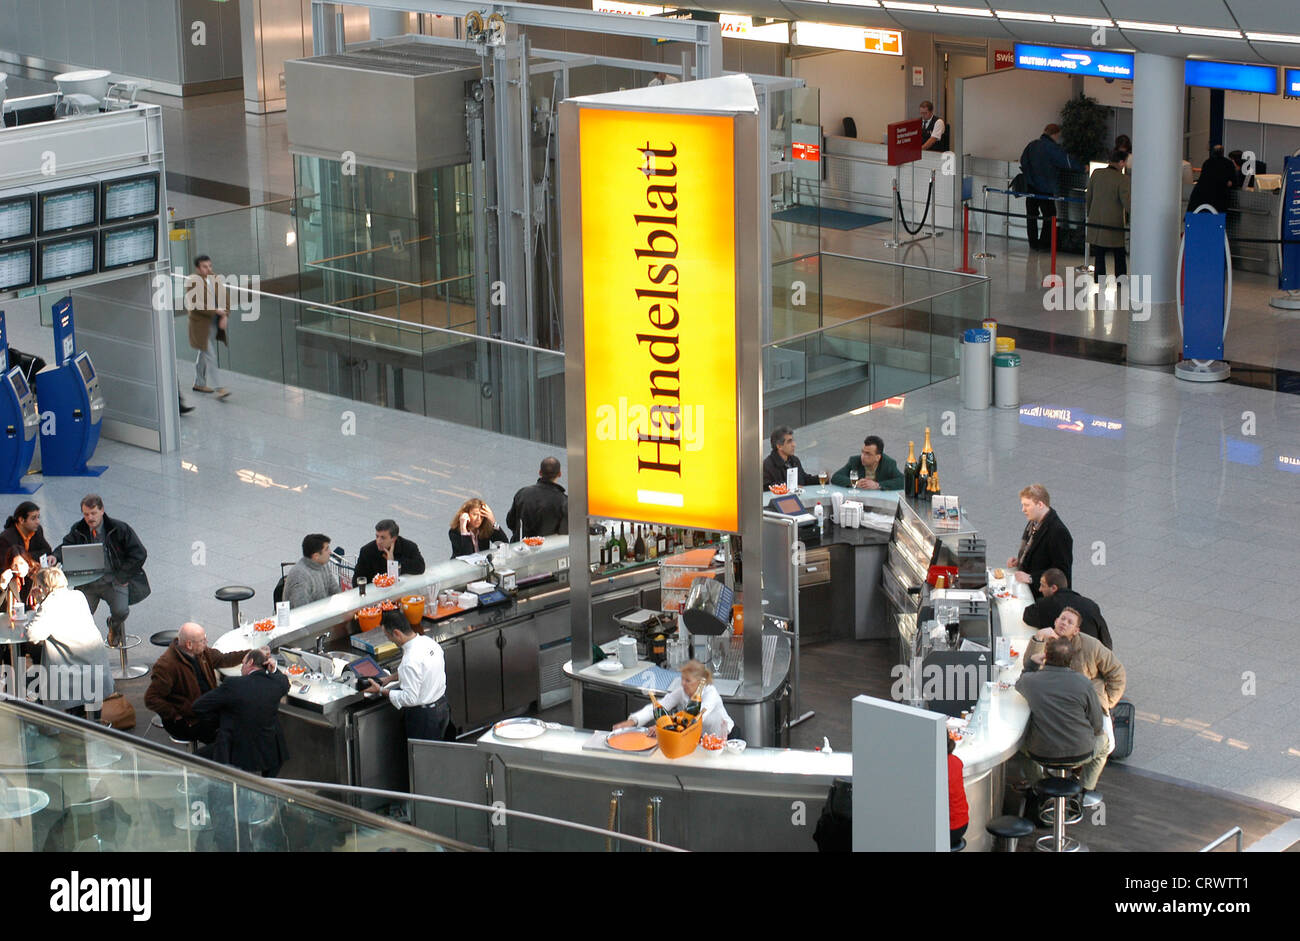 Cafe at Duesseldorf airport Stock Photo